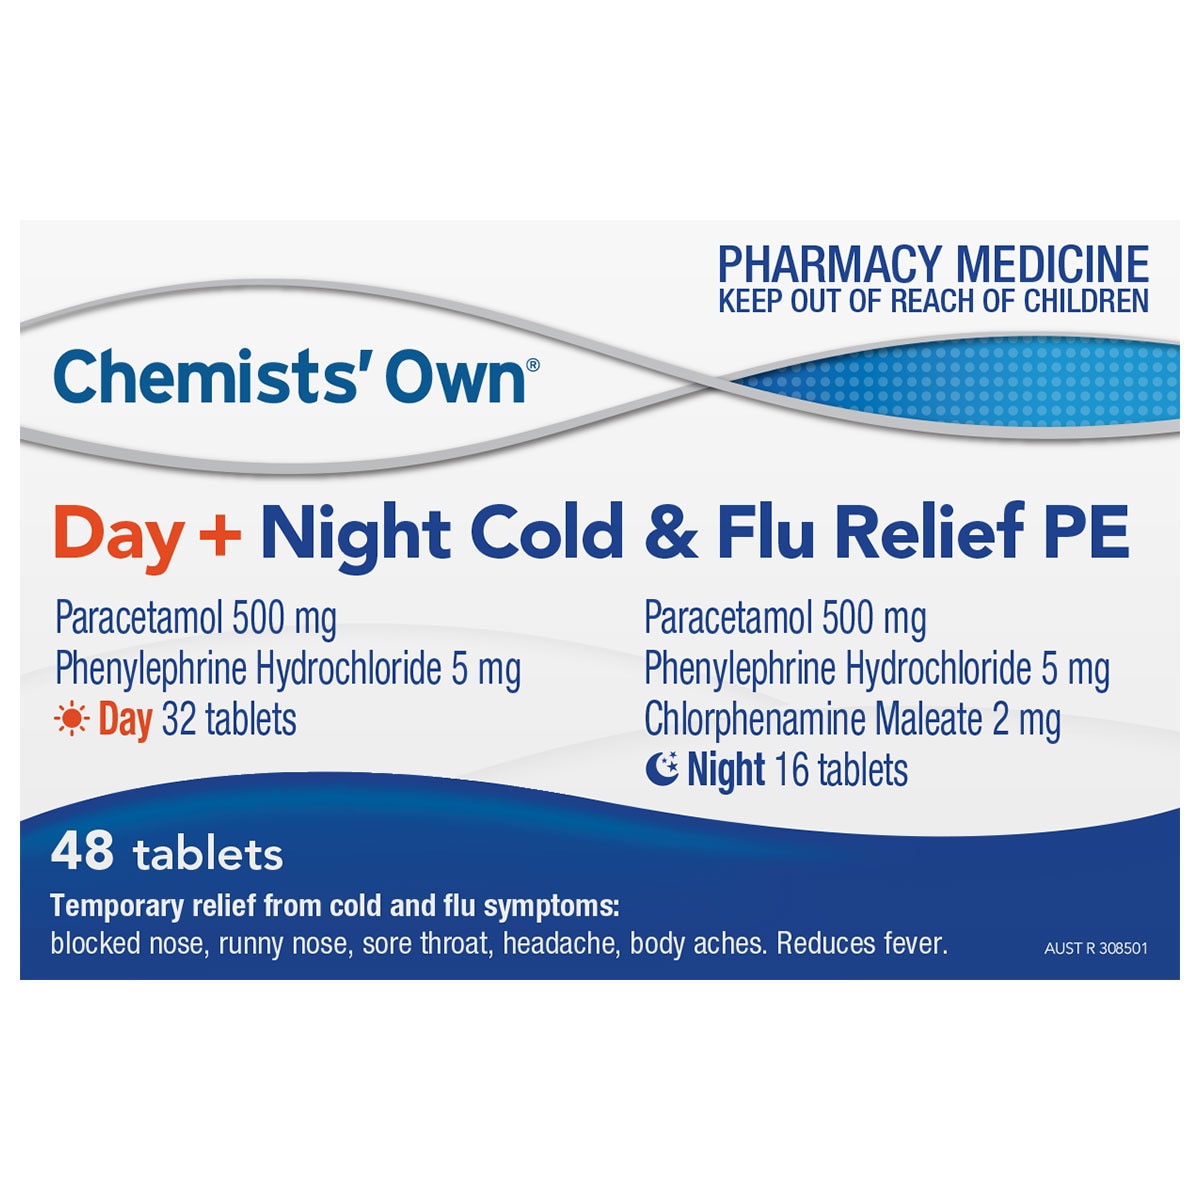 Chemists Own Day + Night Cold & Flu Relief PE 48 Tablets